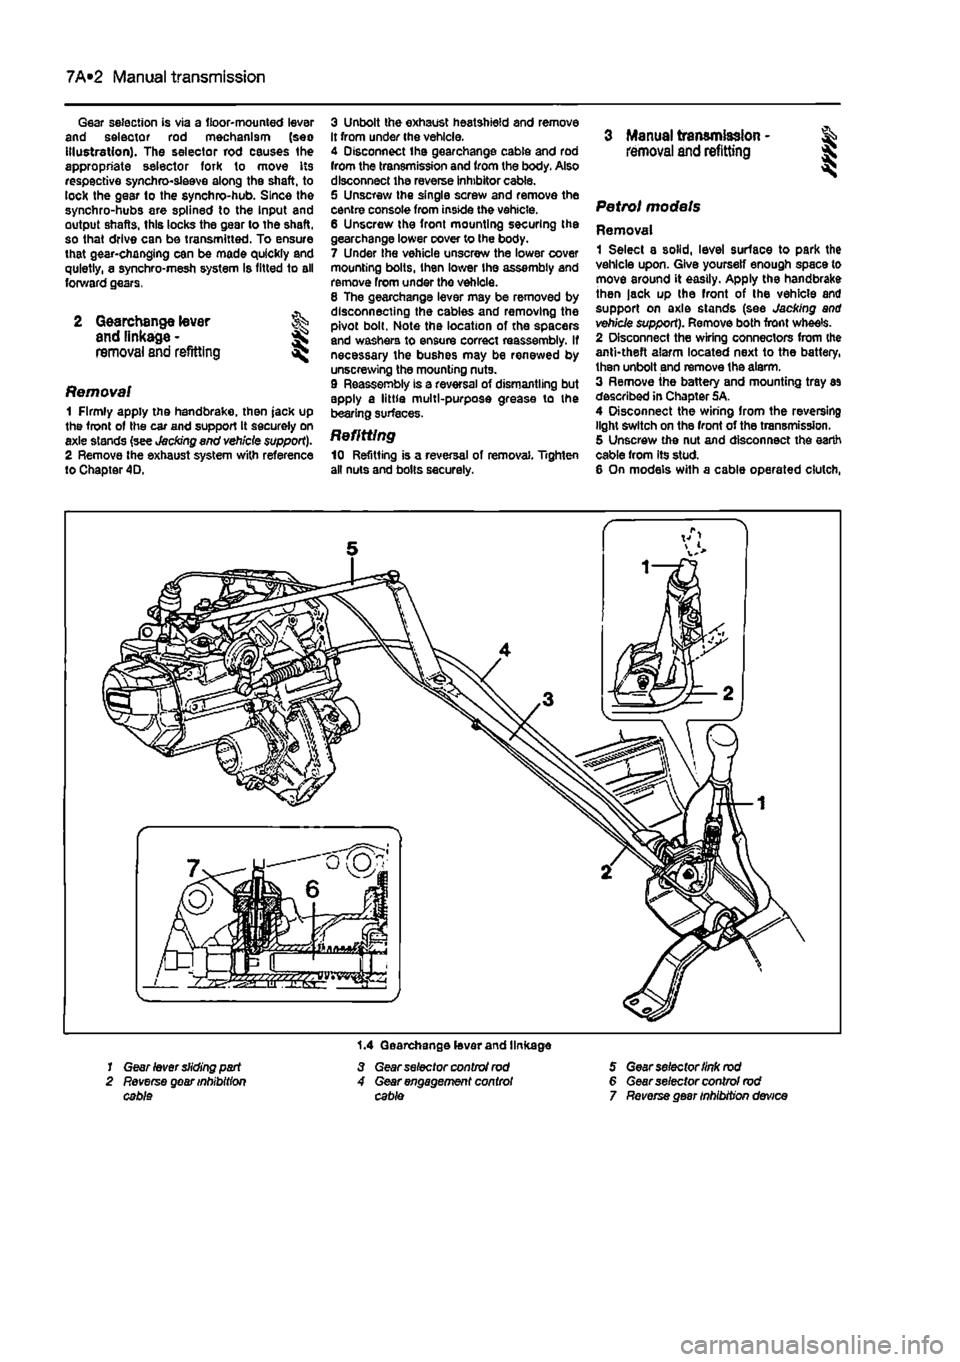 FIAT PUNTO 1995 176 / 1.G Workshop Manual 
7A*2 Manual transmission 
Gear selection is via a floor-mounted lever and selector rod mechanism (seo Illustration). The selector rod causes the appropriate selector fork to move its respective synch